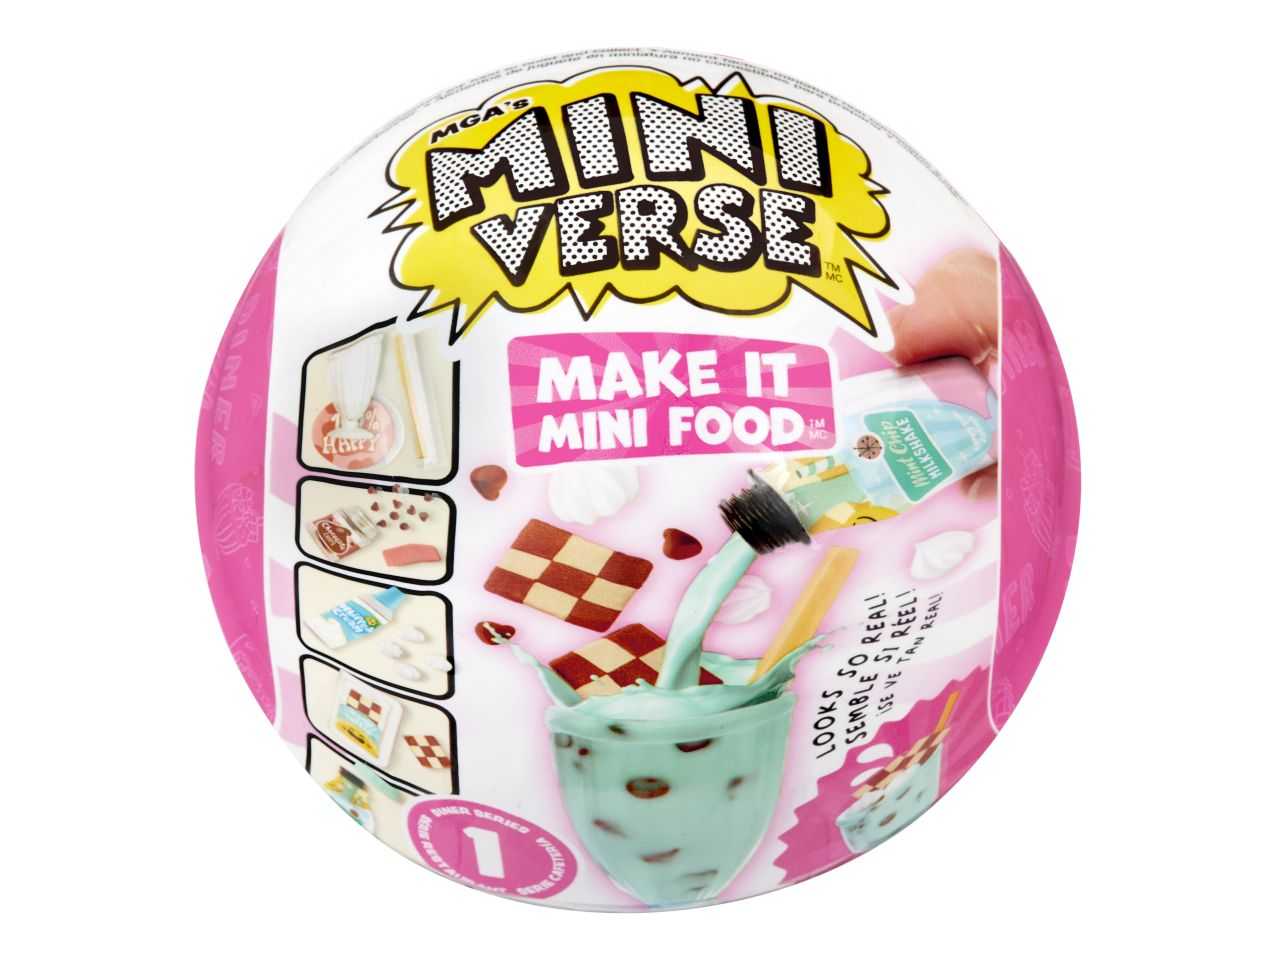 MGA's Miniverse Make It Mini Food Diner Series 1 Minis - Complete  Collection 18 Packages, Blind Packaging, Stocking Stuffers, DIY, Resin  Play